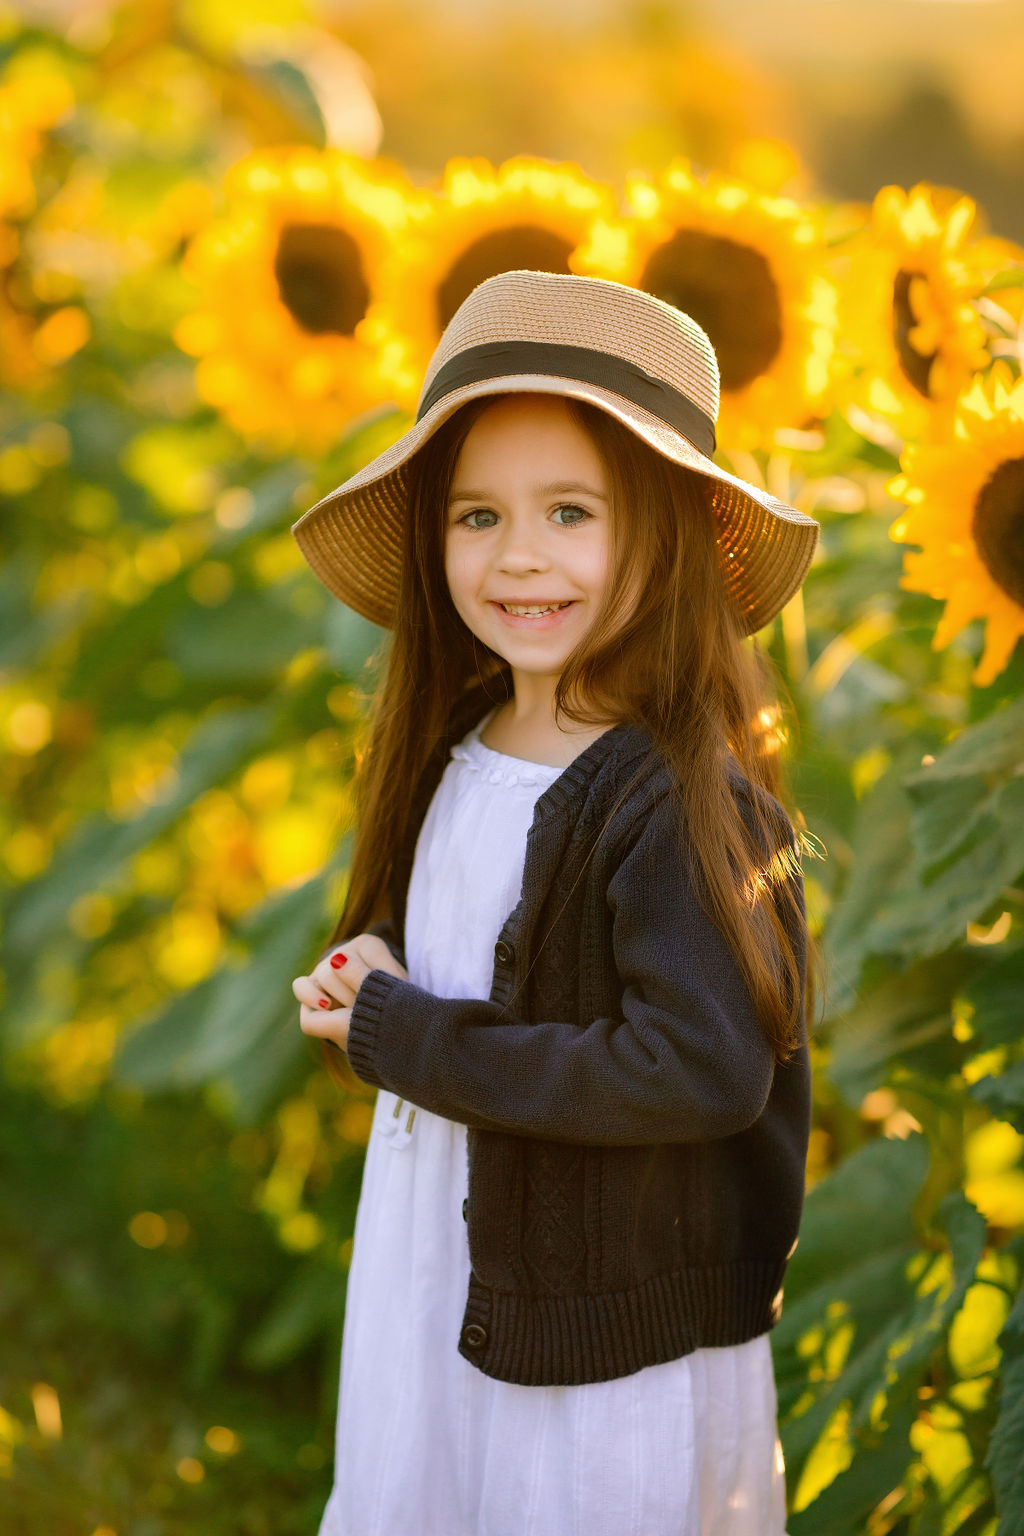 A young girl in a big woven hat, black sweater and white dress stands in a field of sunflowers inmotion school of dance